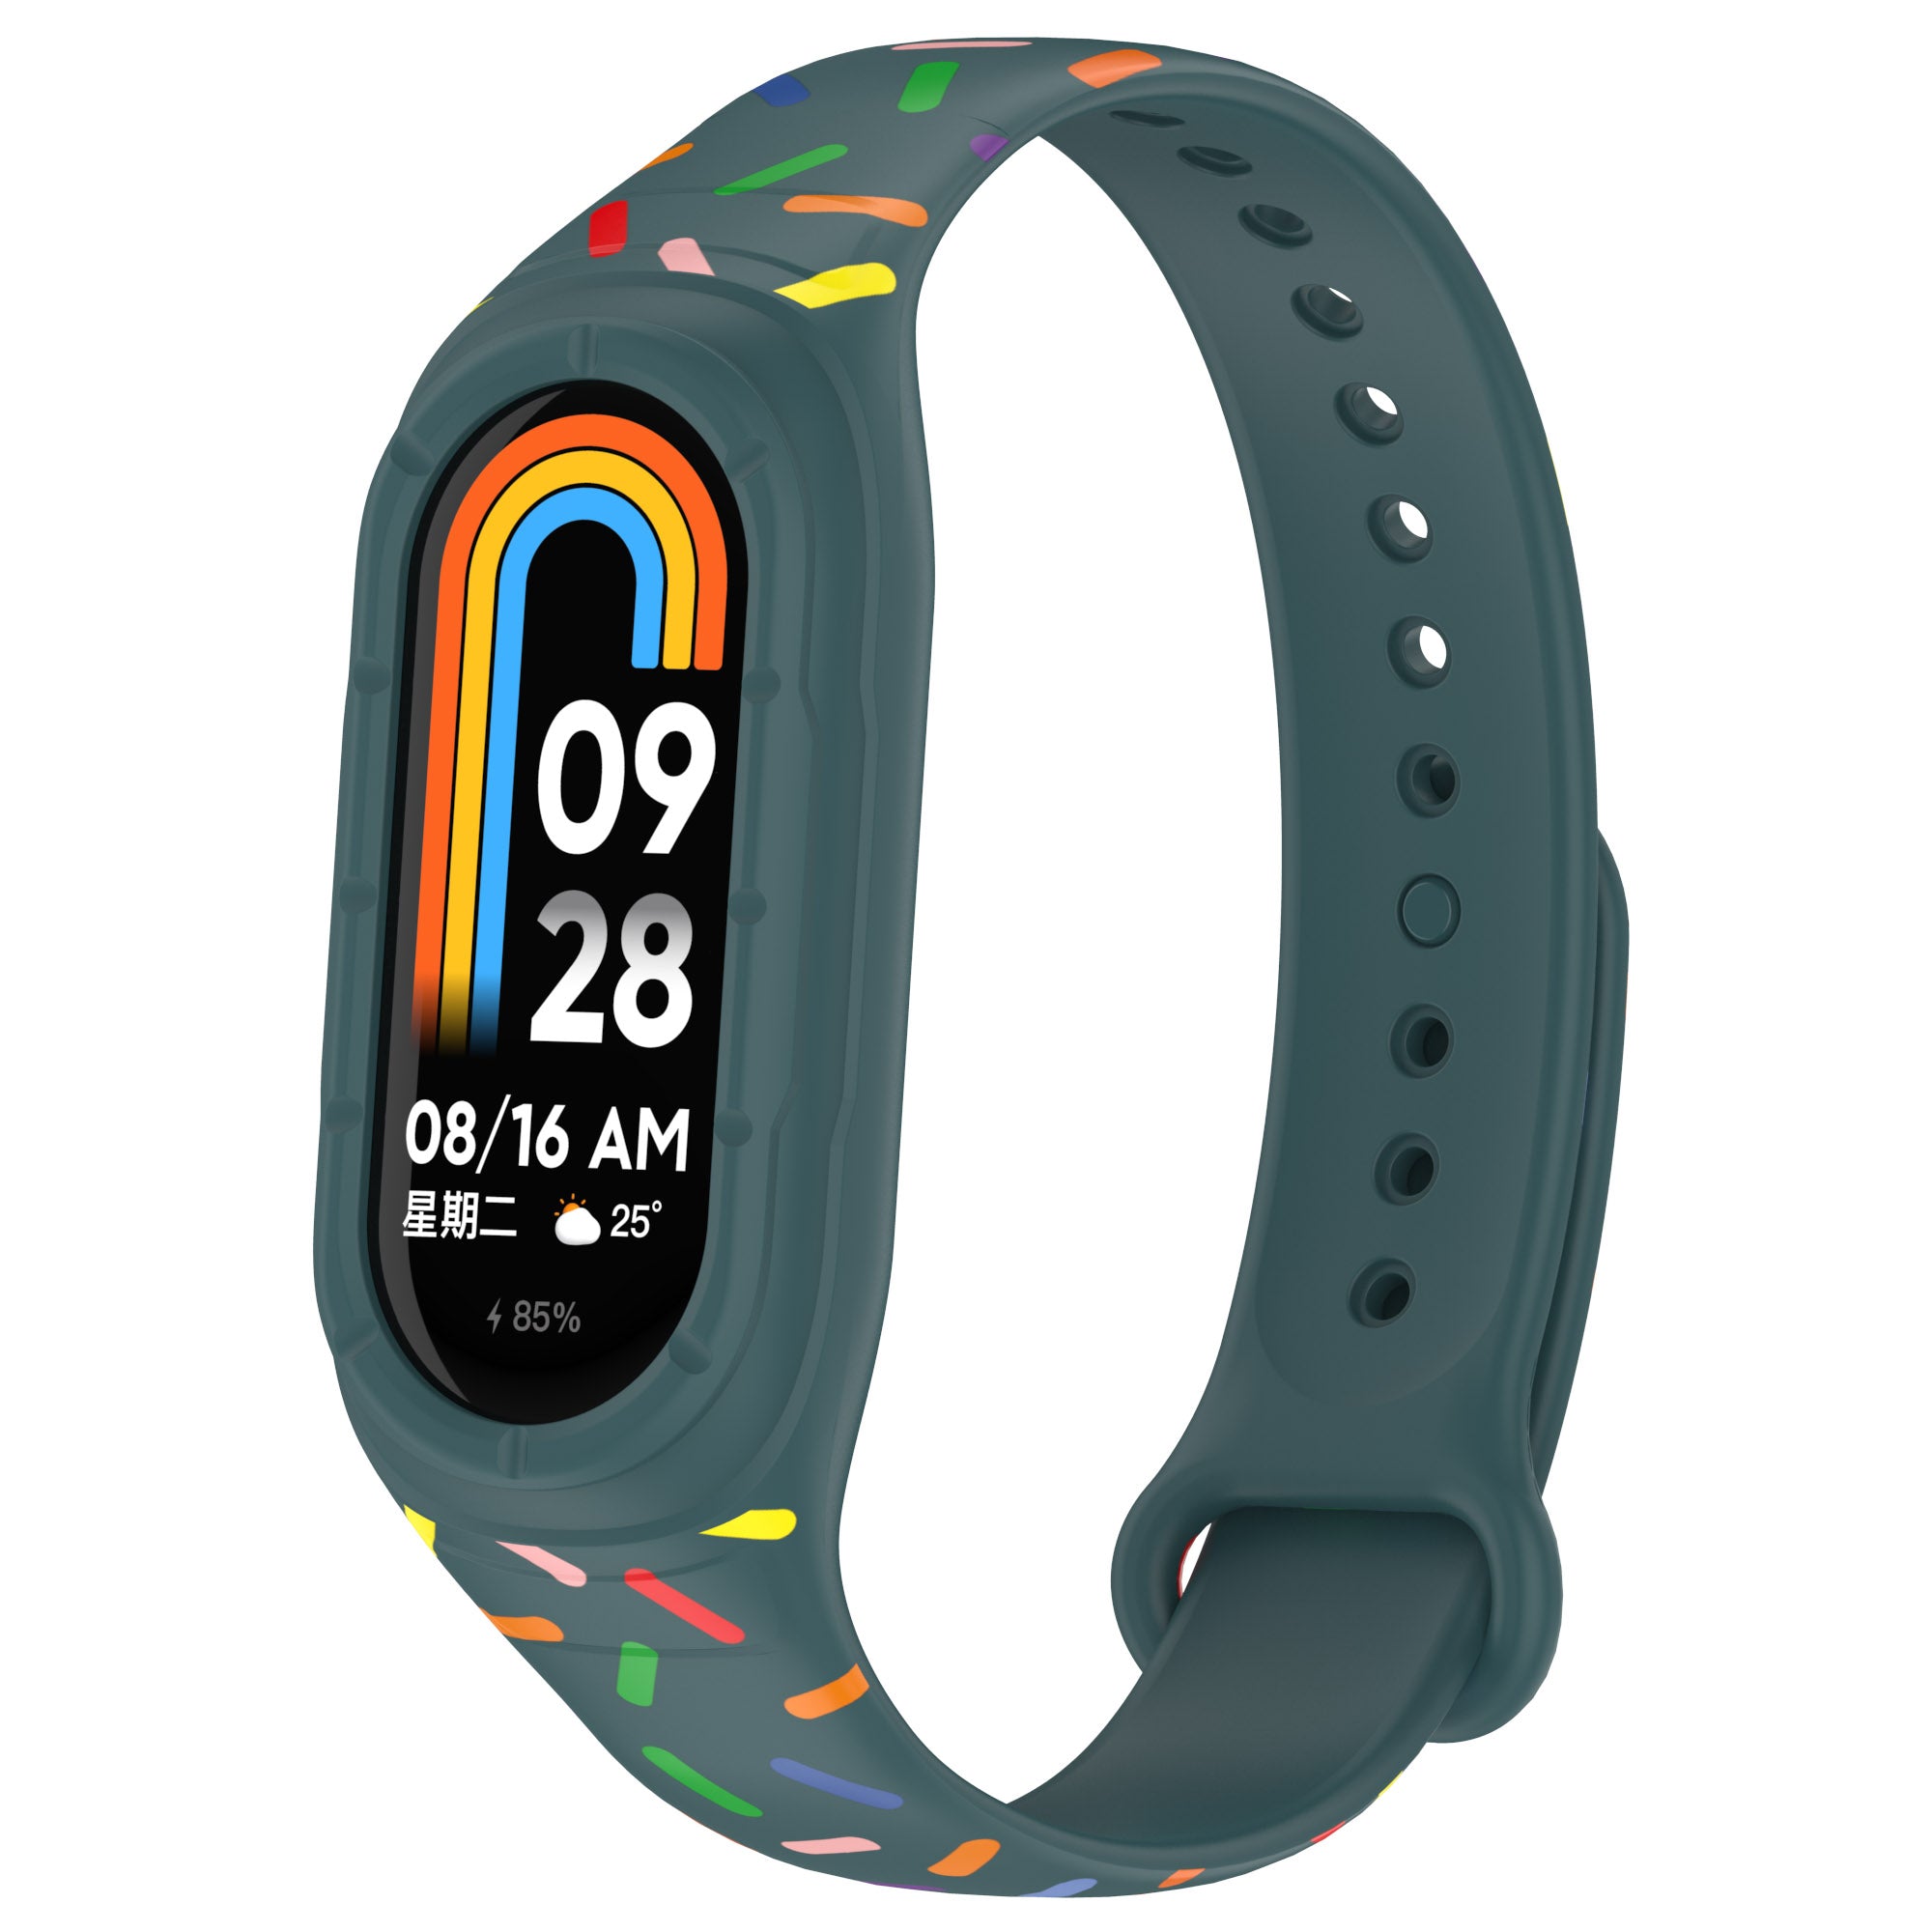 Uniqkart for Xiaomi Smart Band 8 Integrated Silicone Strap Colorful Spotted Replacement Wrist Band - Green